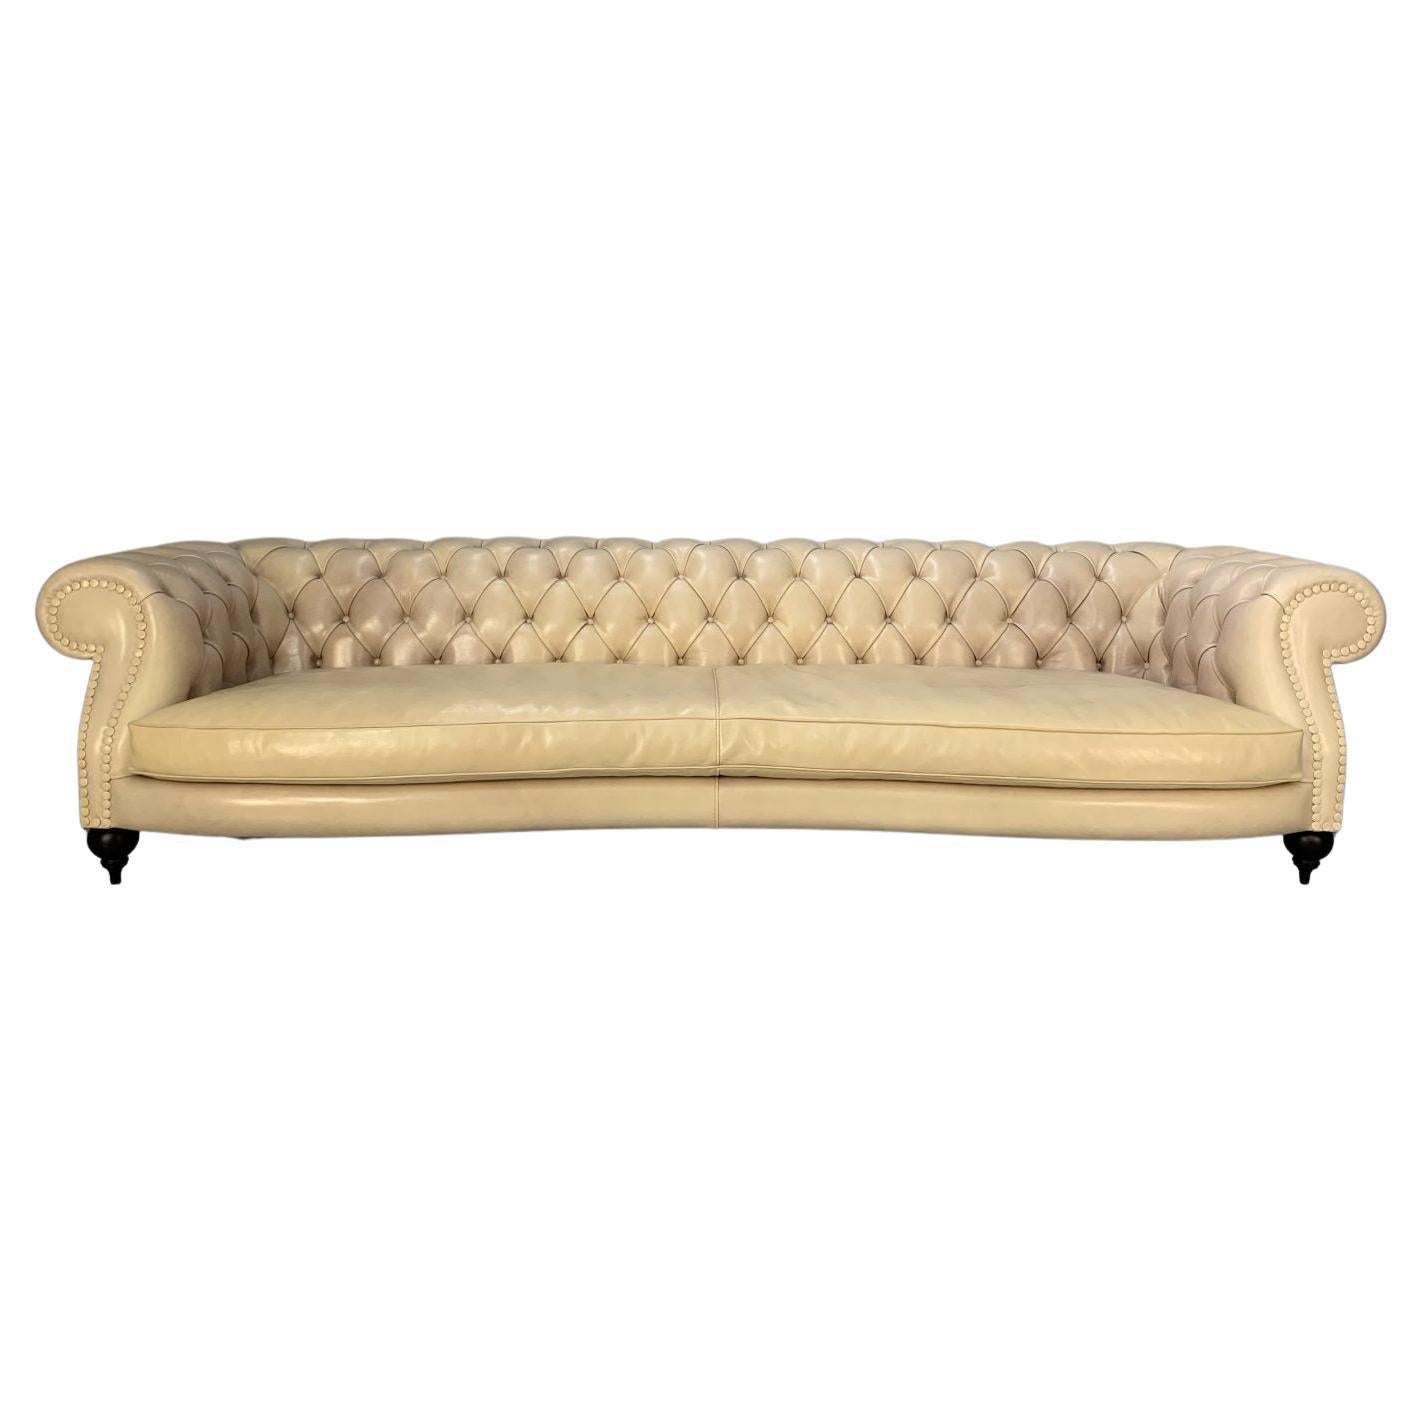 Baxter of Italy “Diana Chester” 4-Seat Sofa in Cream “Tuscany” Leather